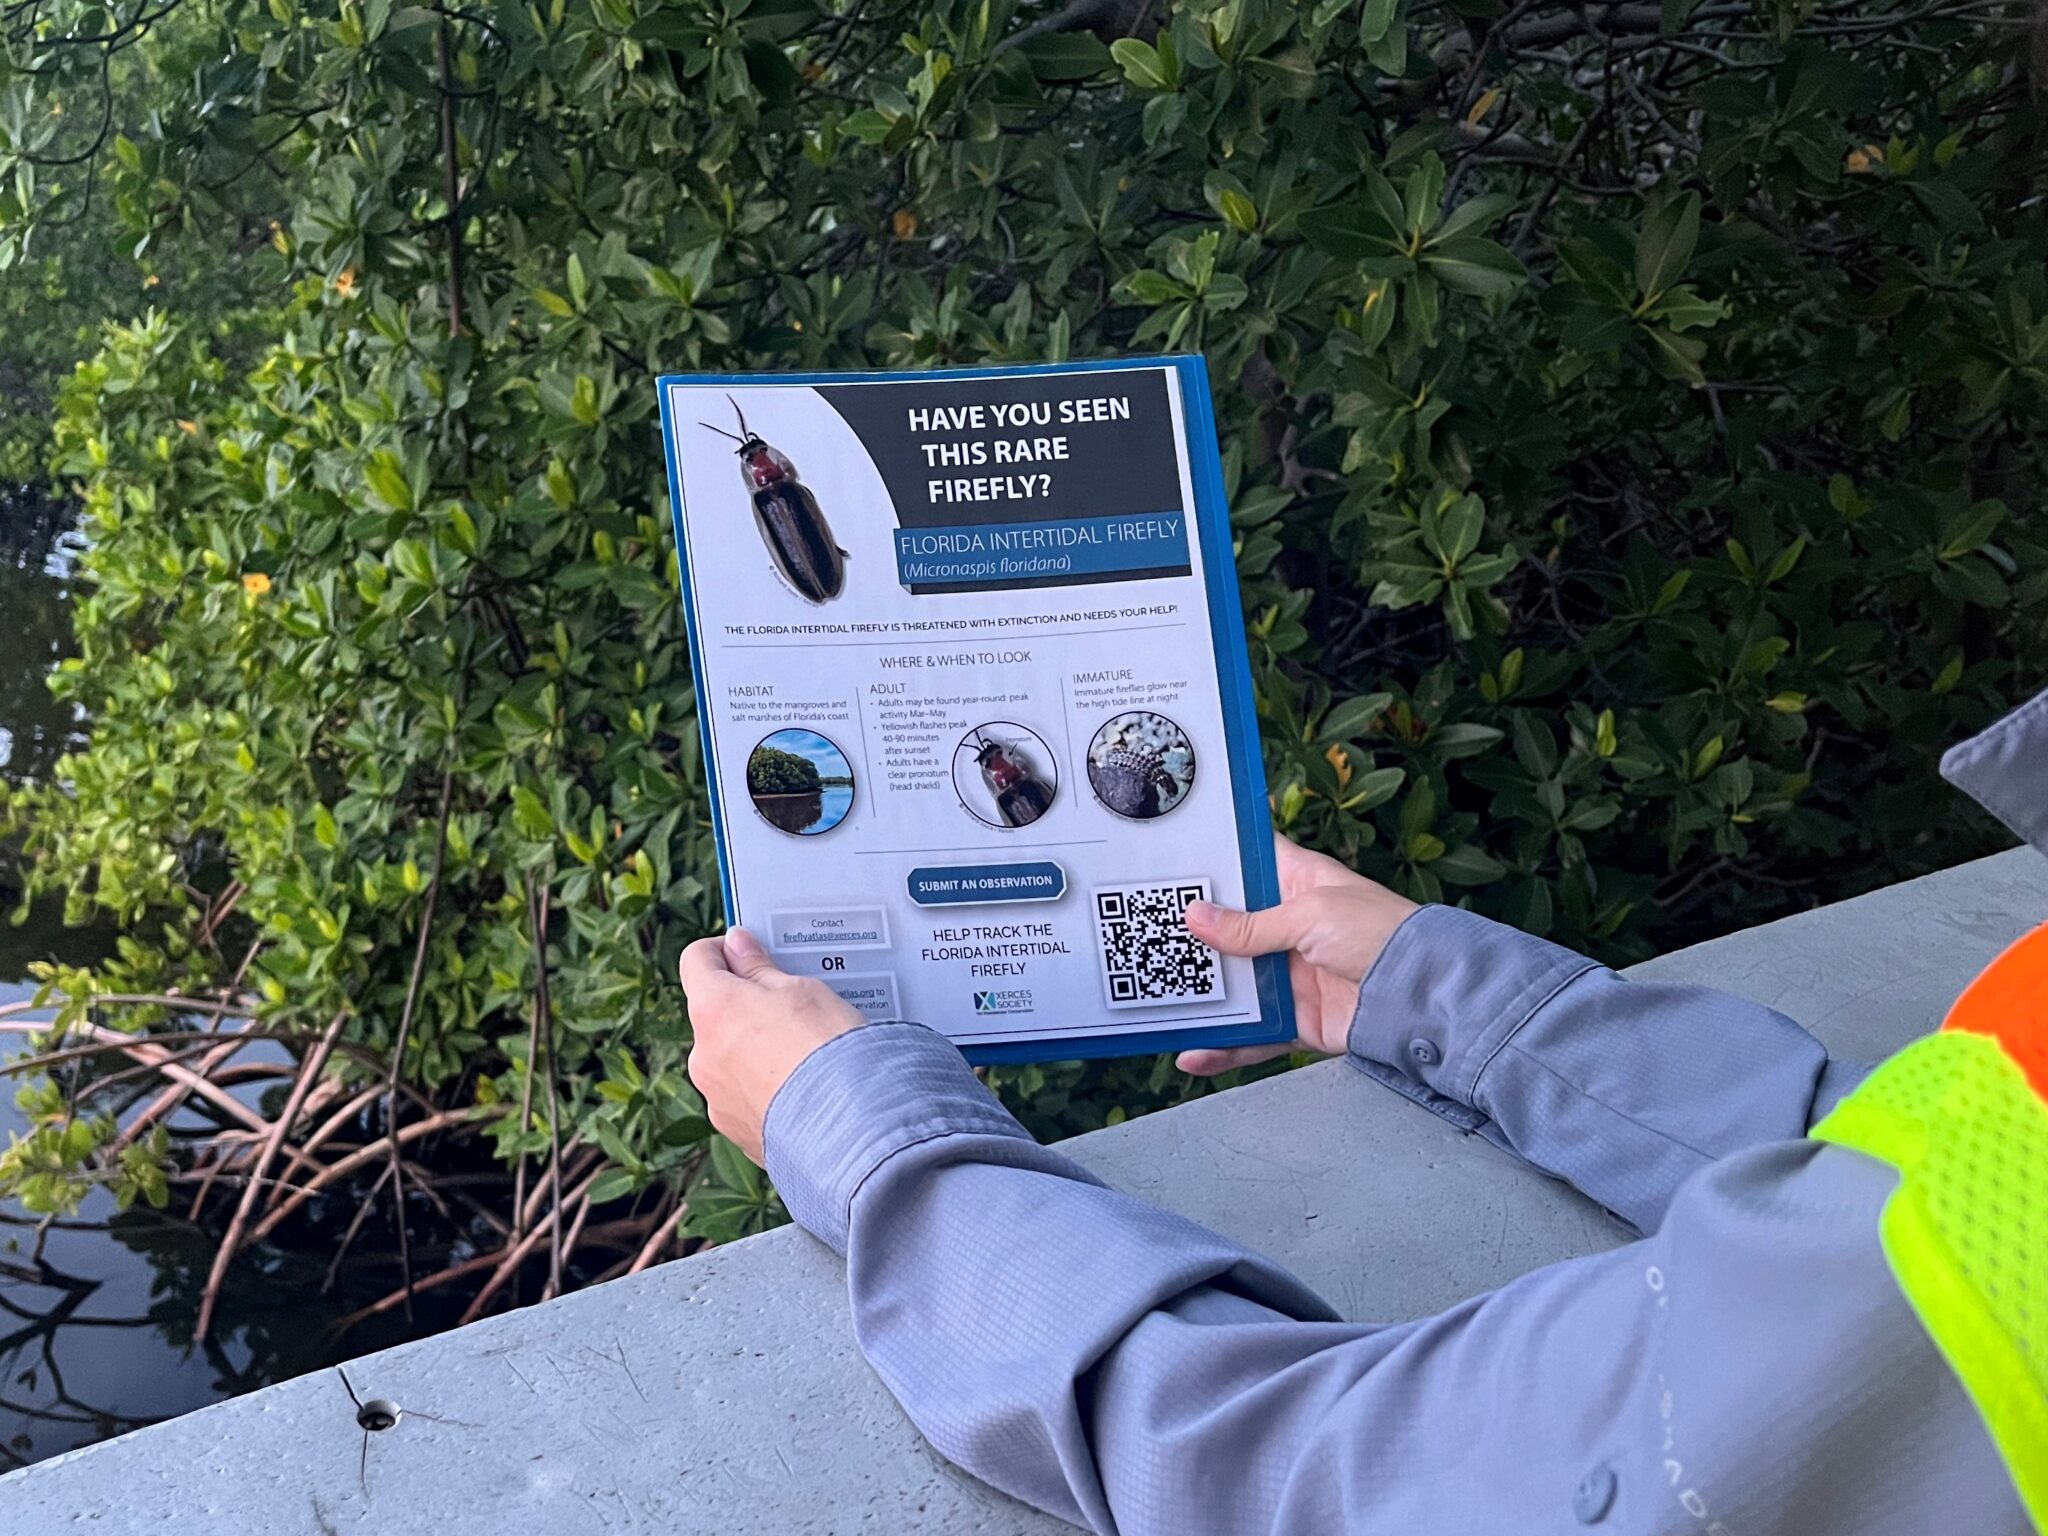 A person's hands are seen holding a flyer over a boardwalk railing, with water and mangrove roots in the background. The flyer says "Have you seen this rare firefly?" and has photos of a firefly species.